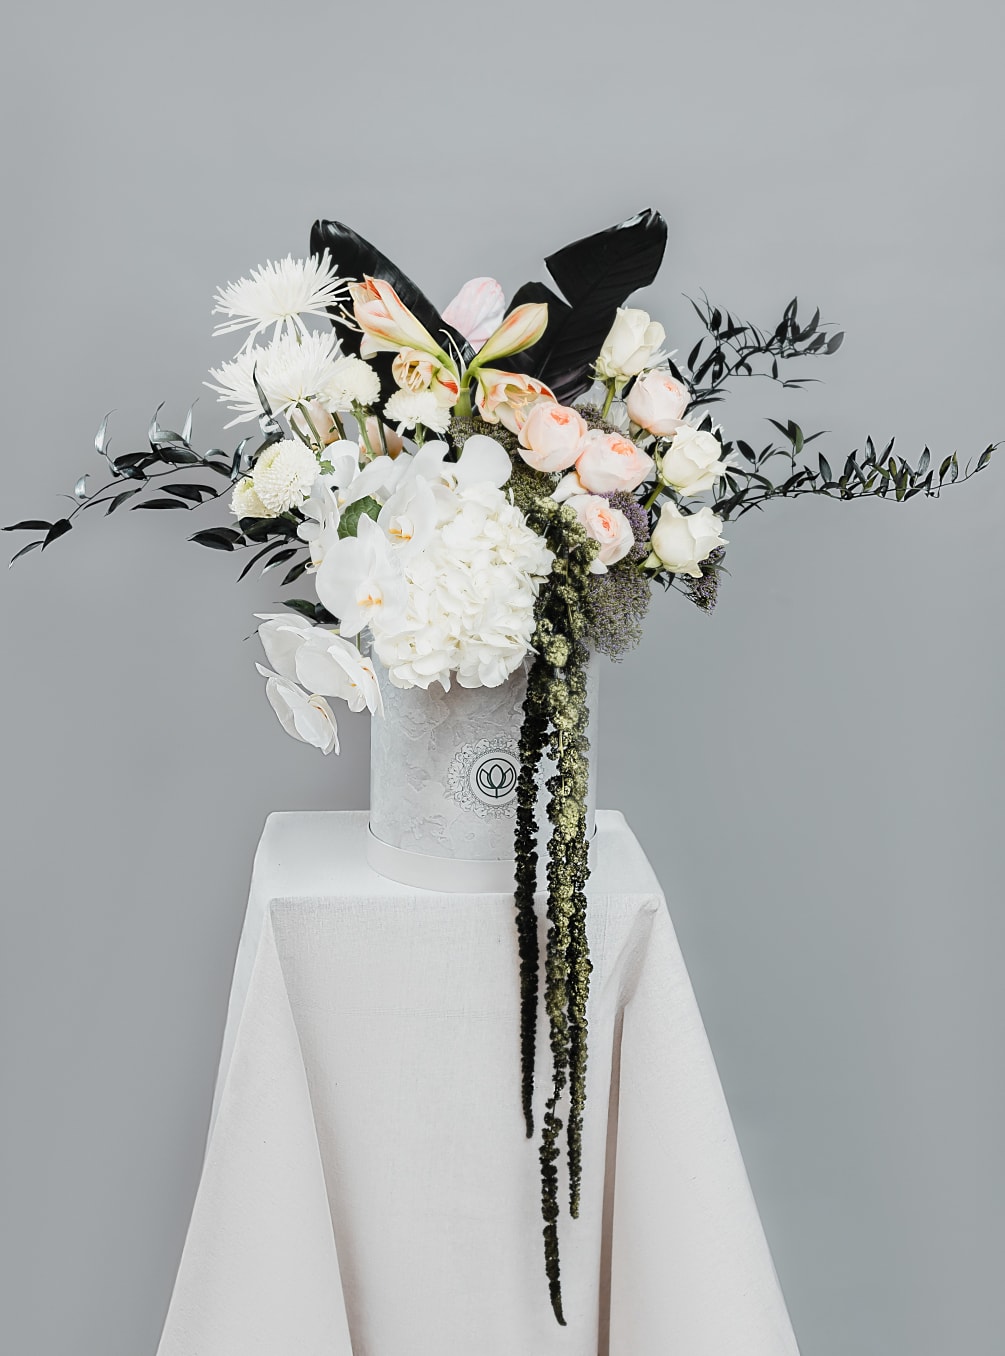 Symphony of black amaranth and white roses, hydrangeas and orchids.
Extra Large box